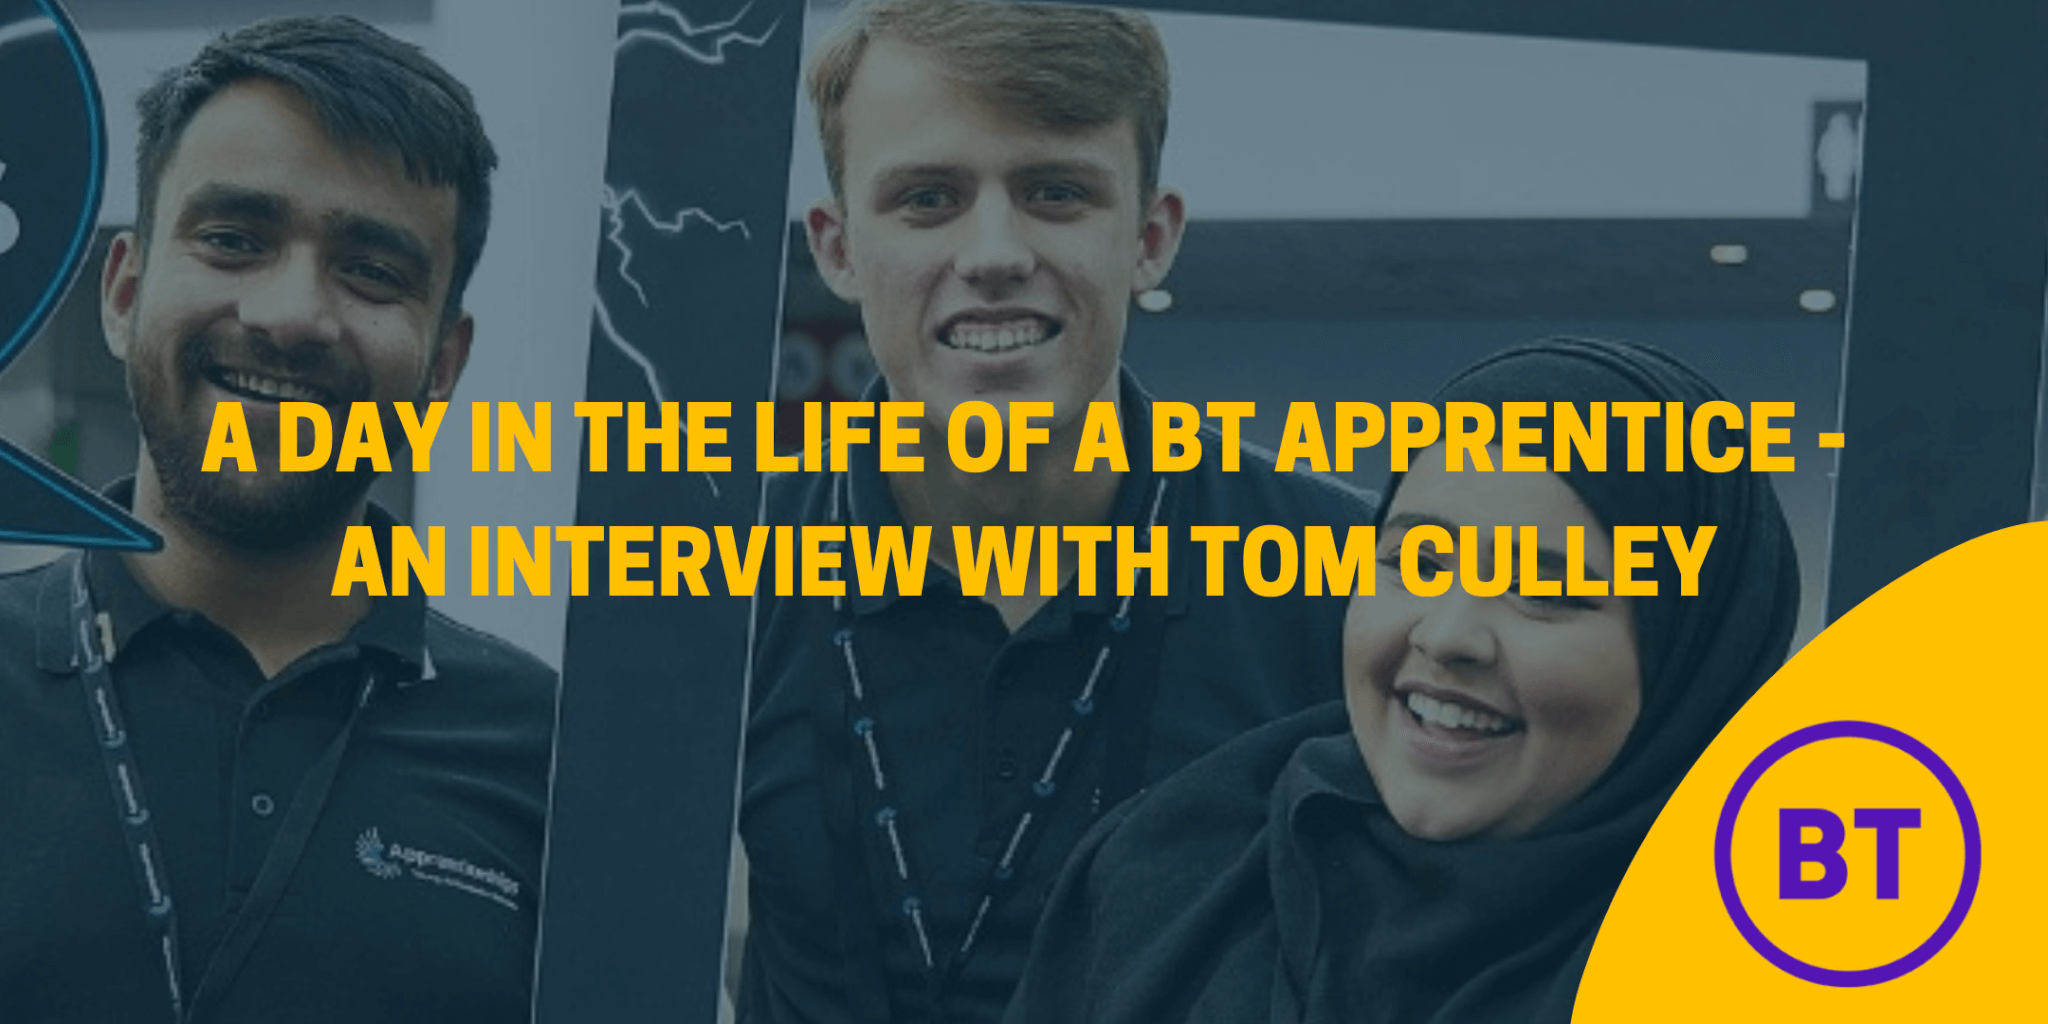 Working as a BT Apprentice! What is it really like?